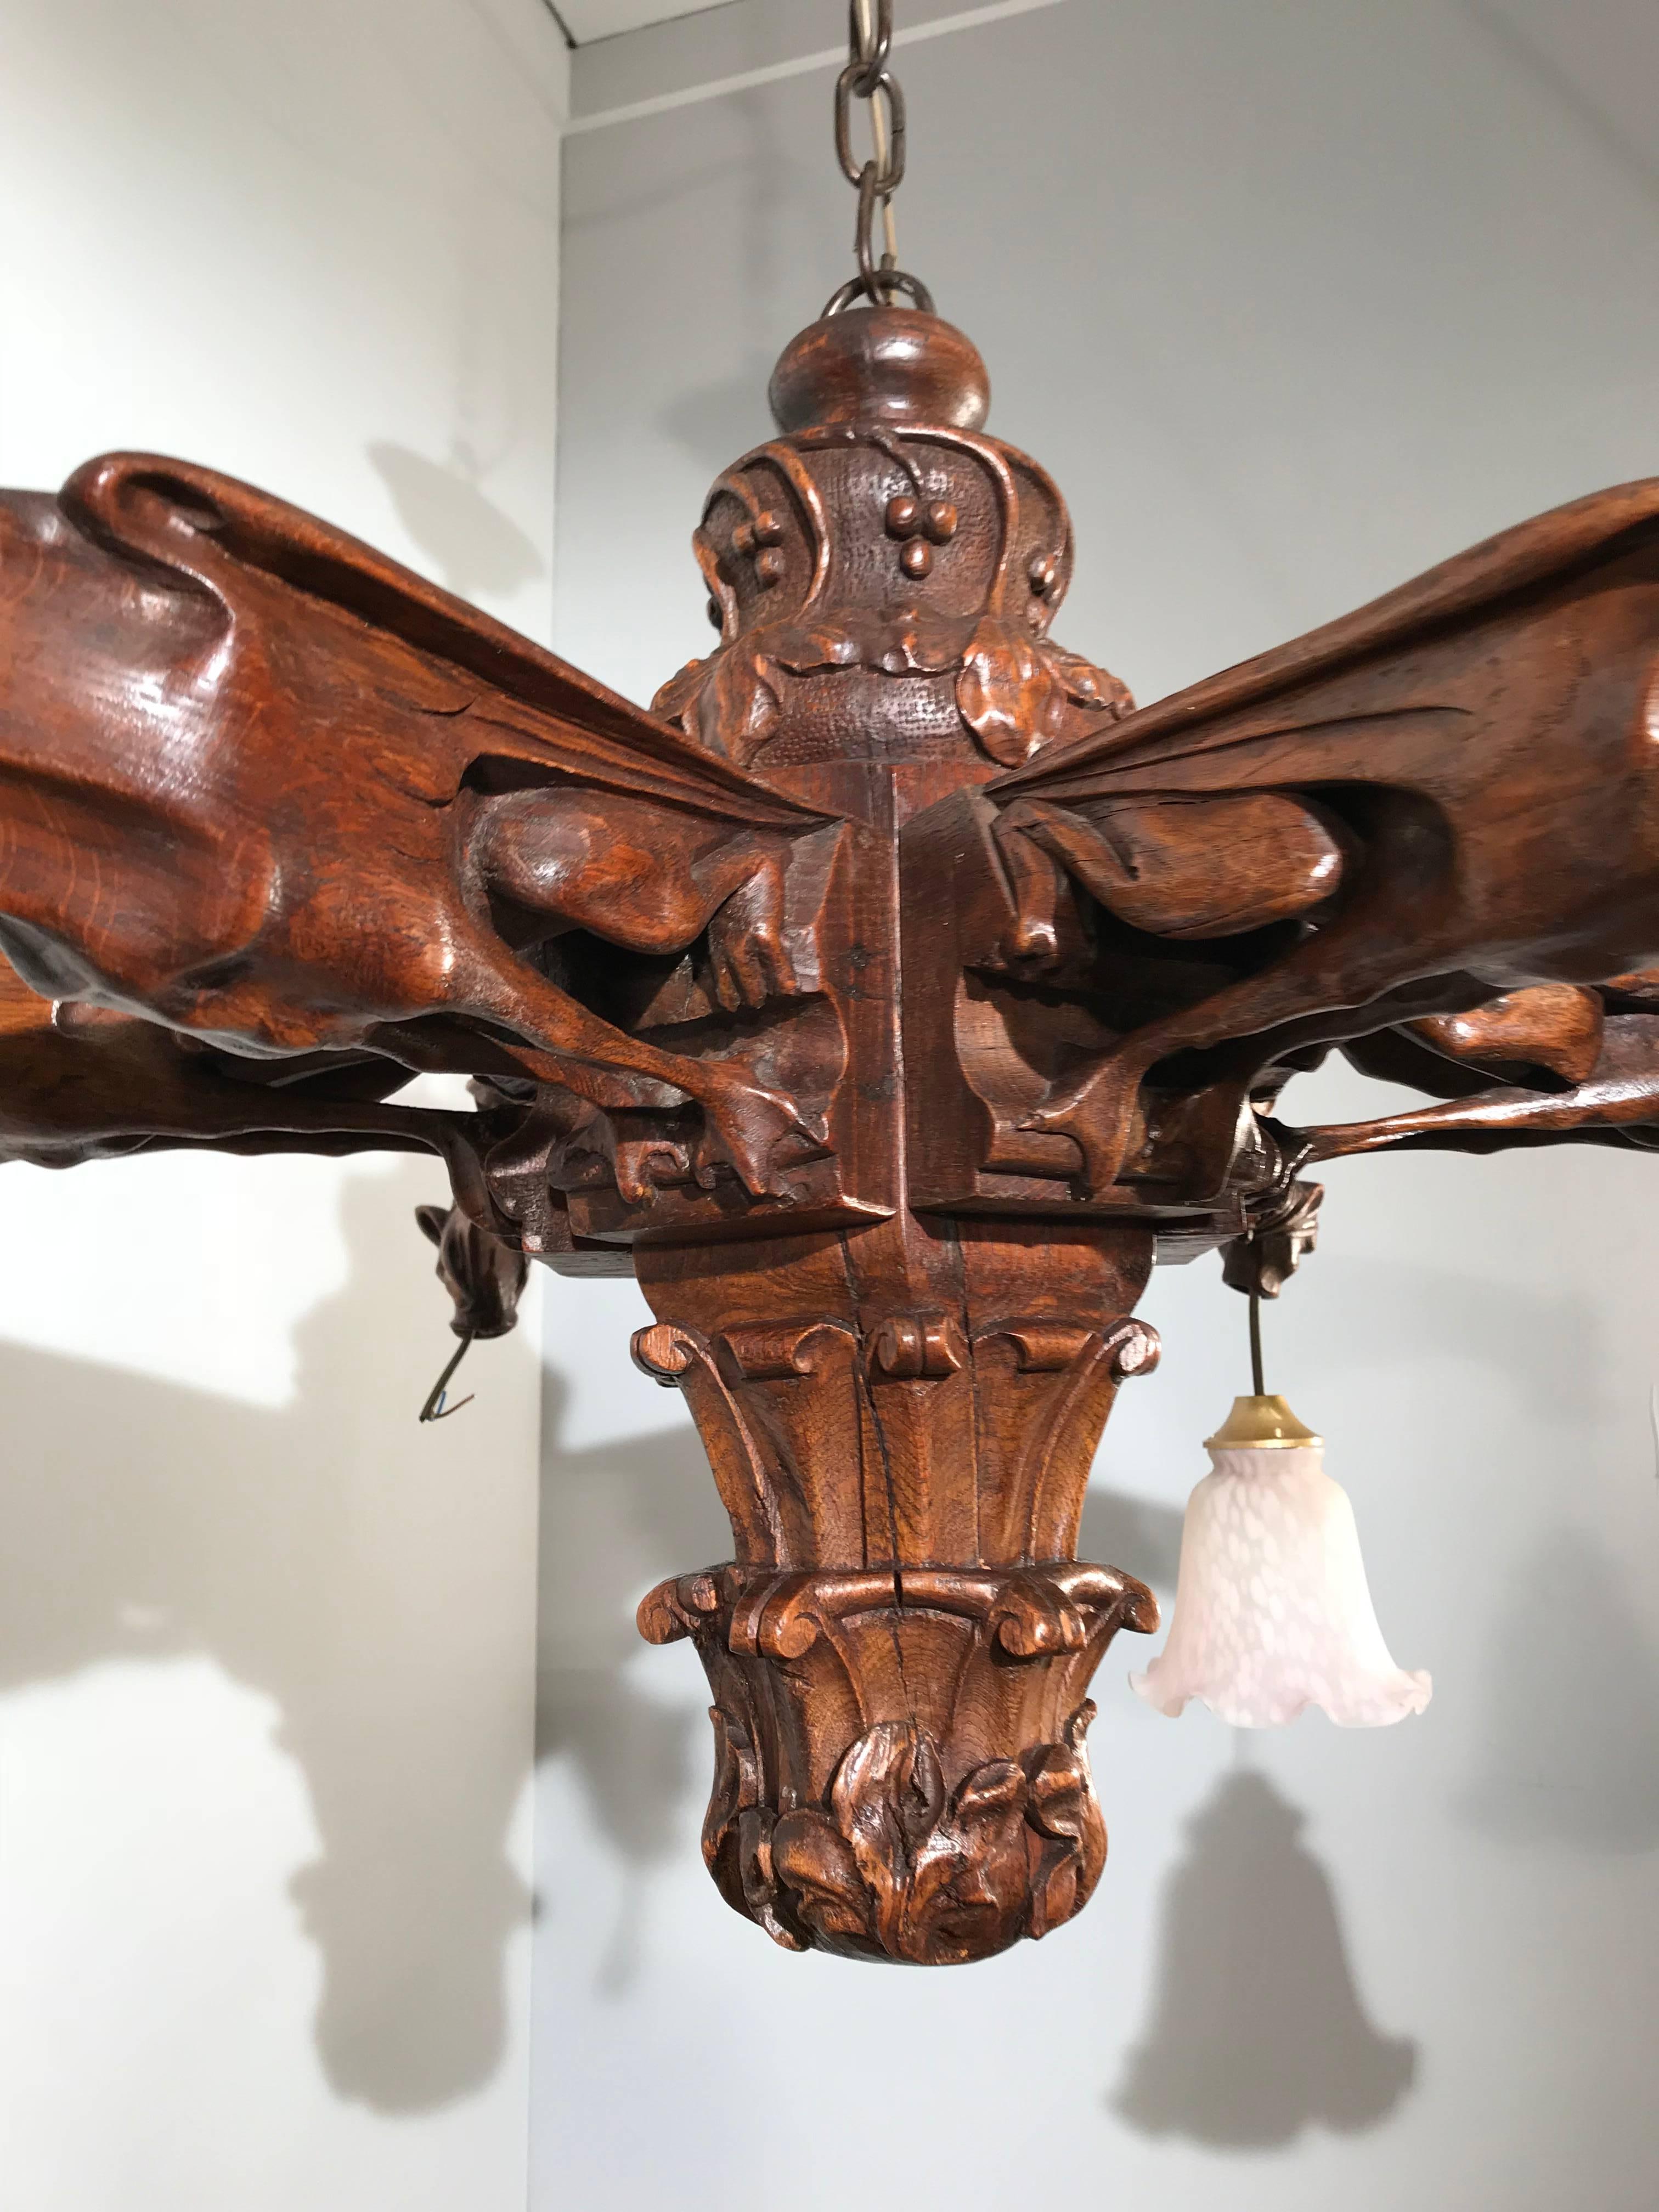 Large Gothic Revival, six arms light fixture.

If you are looking for the best crafted and most striking chandeliers only then this European light fixture could be perfect for you. This incredibly well carved specimen from circa 1900 is an